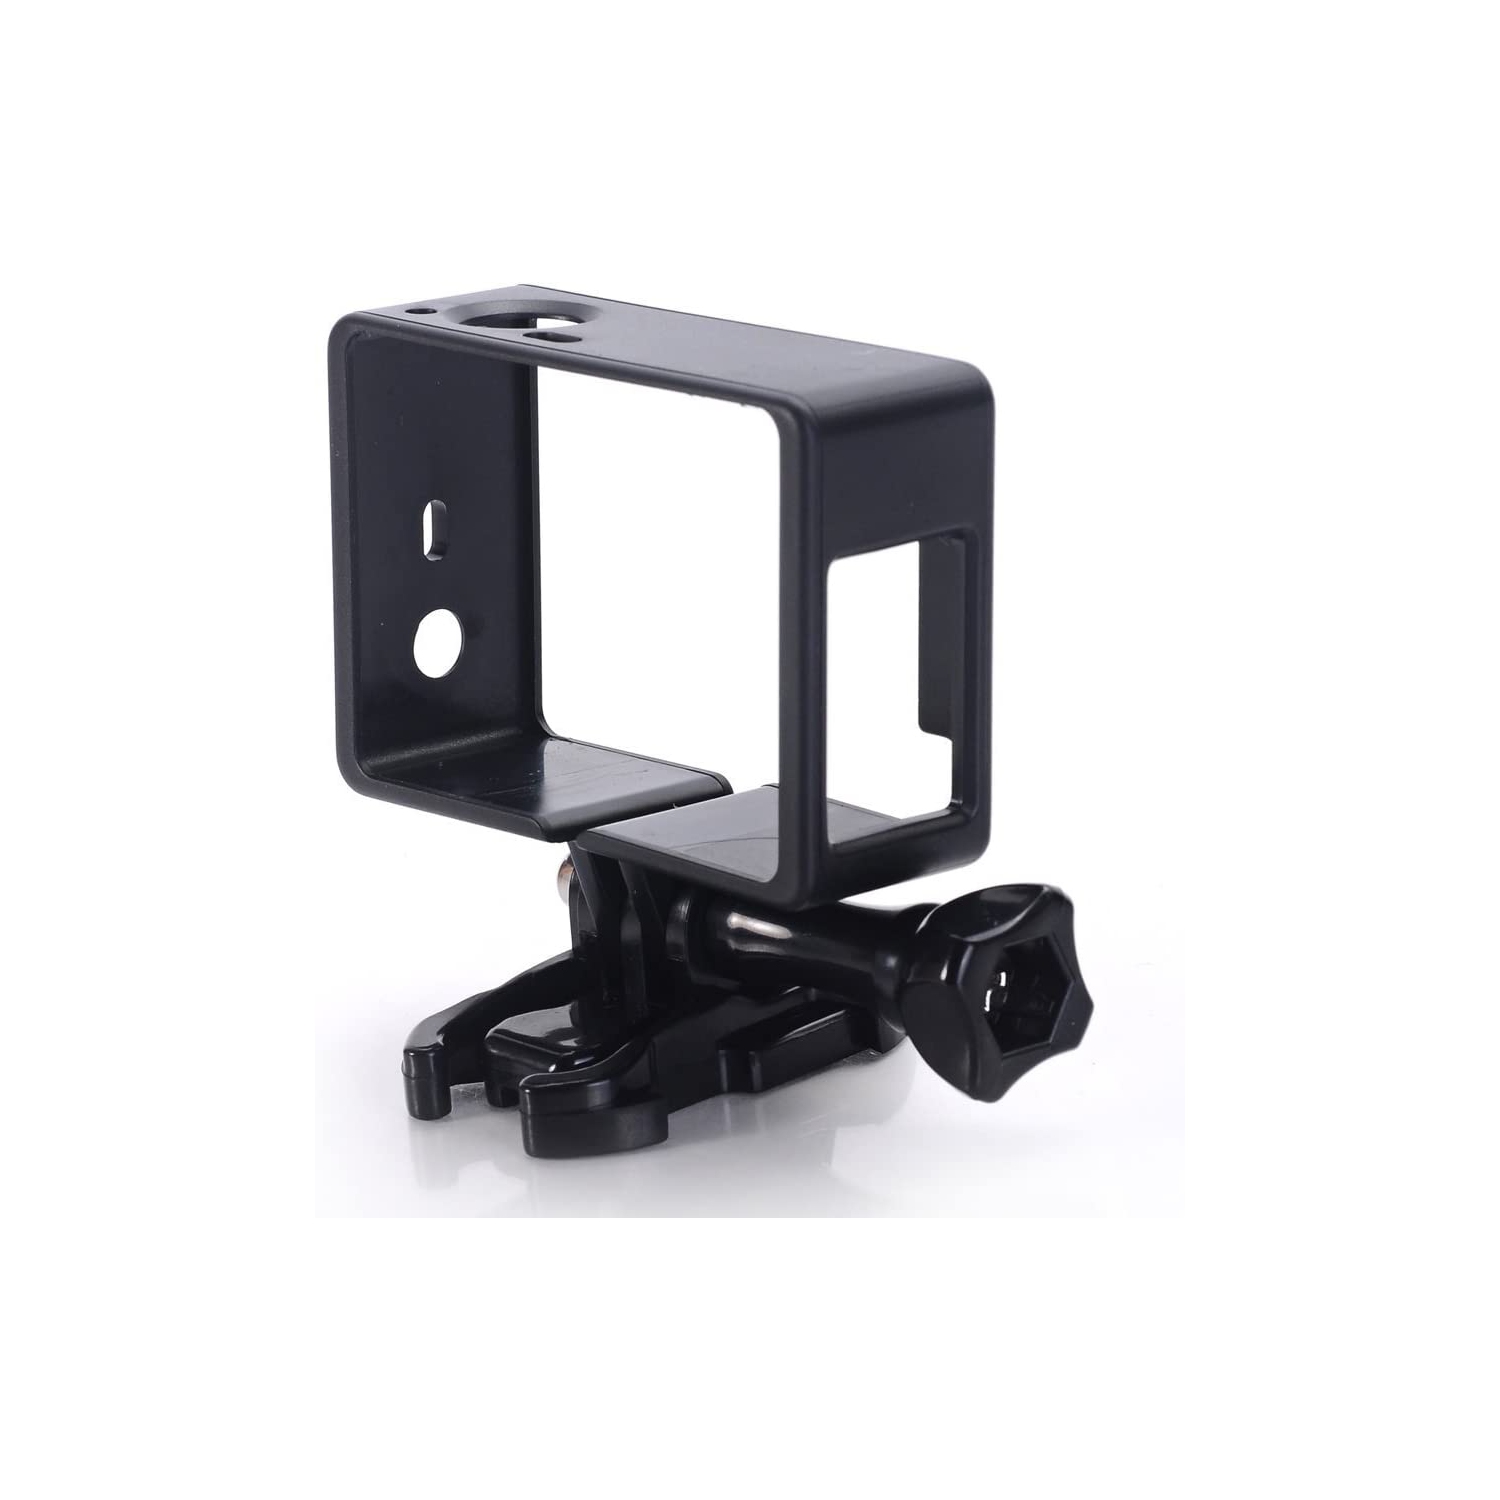 Frame Mount for GoPro Hero 4 3+, and 3 Light and Compact Housing All Slots Fully Accessible, with Large Thumbscrew and Quick Release Mount